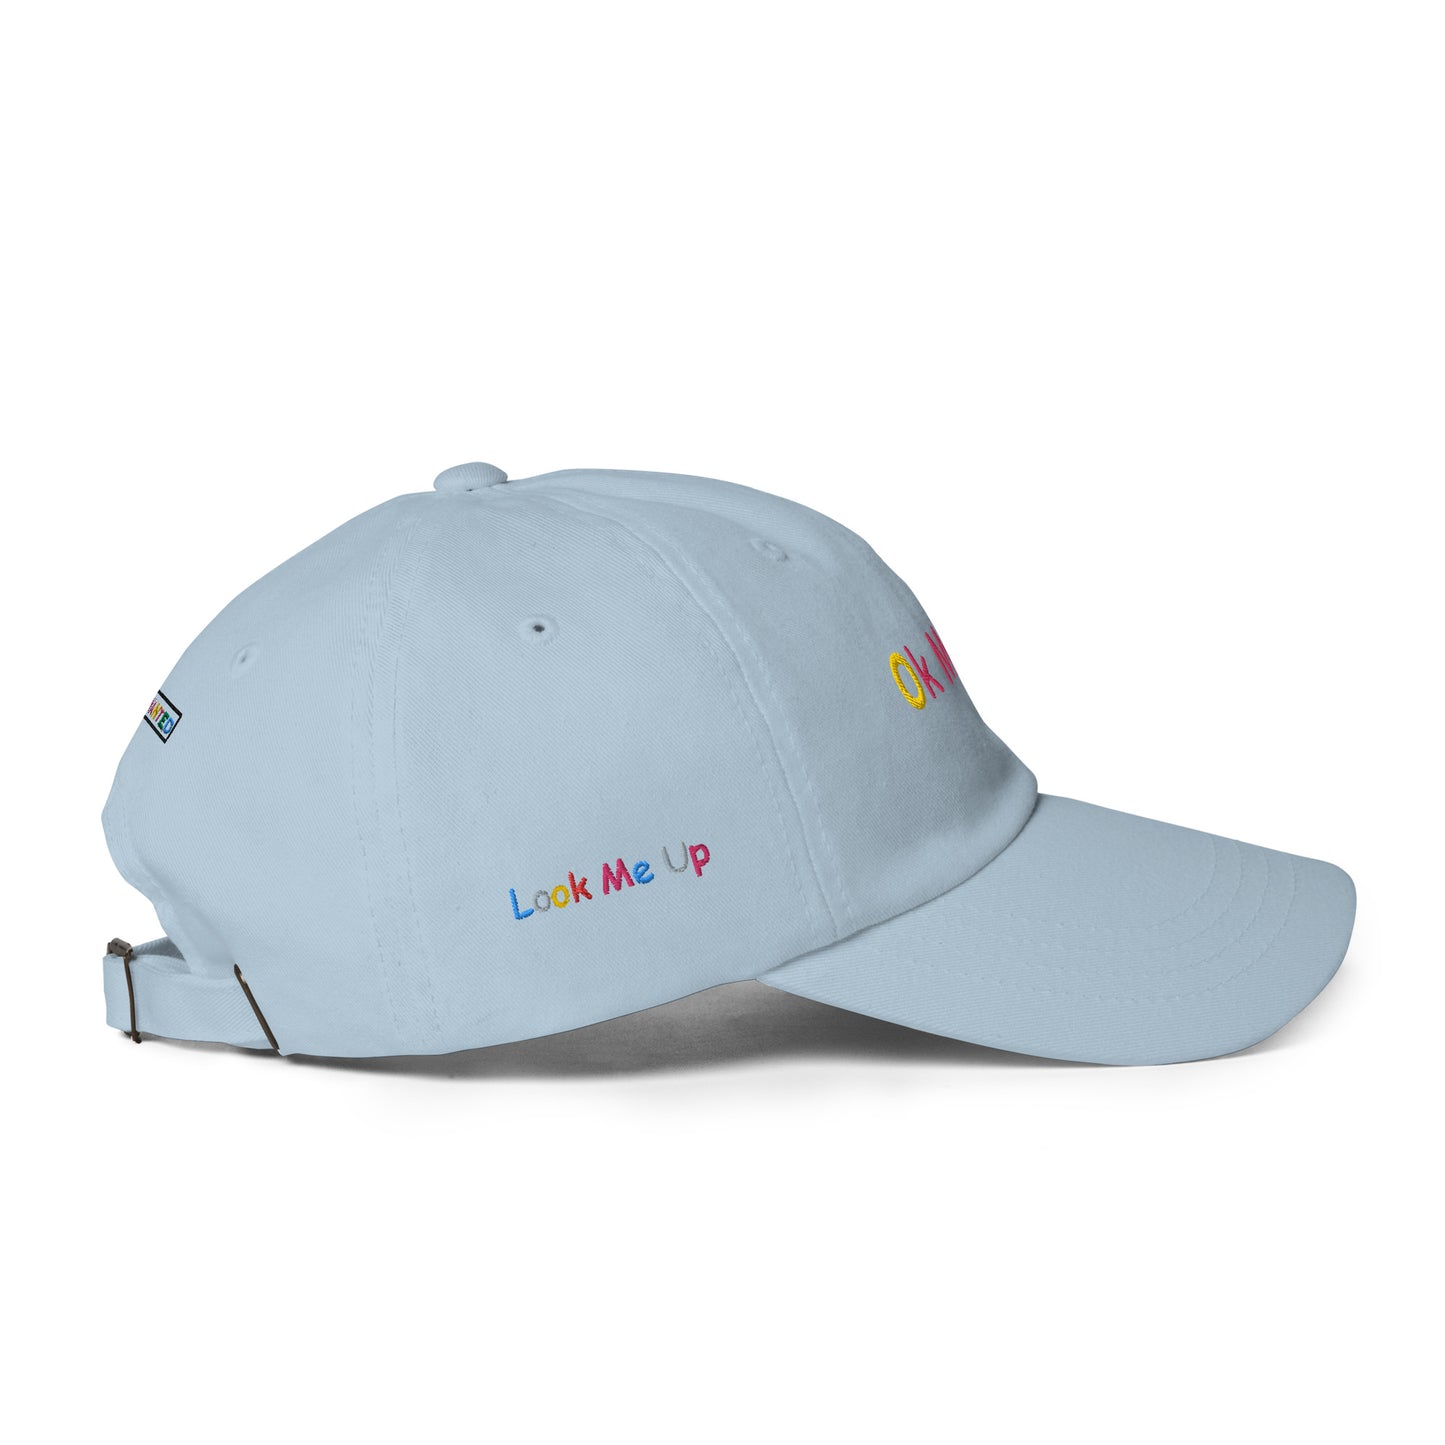 Ok Im Up Most Wanted) Dad hat